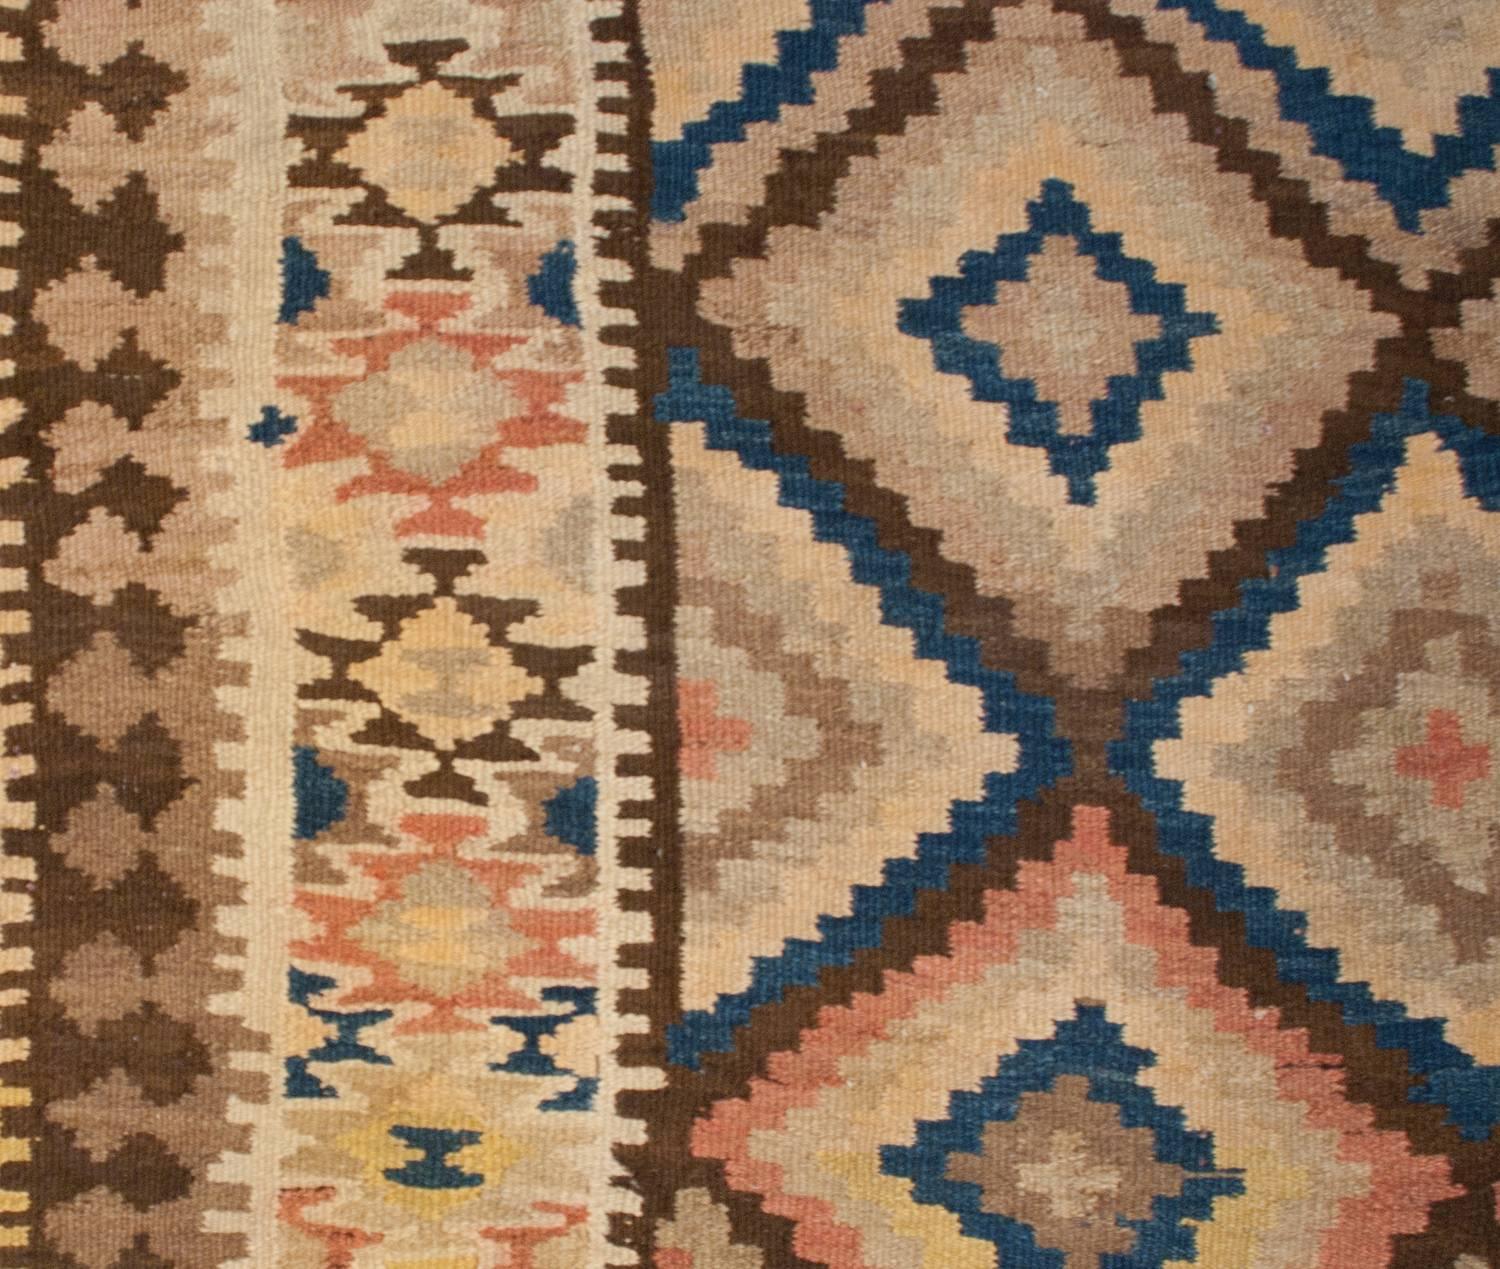 A wonderful early 20th century Persian Shahsavan Kilim runner with an incredible field of diamonds, woven with multicolored stripes. The border is composed with multiple contrasting geometric patterns, woven with similar vegetable dyed wool.